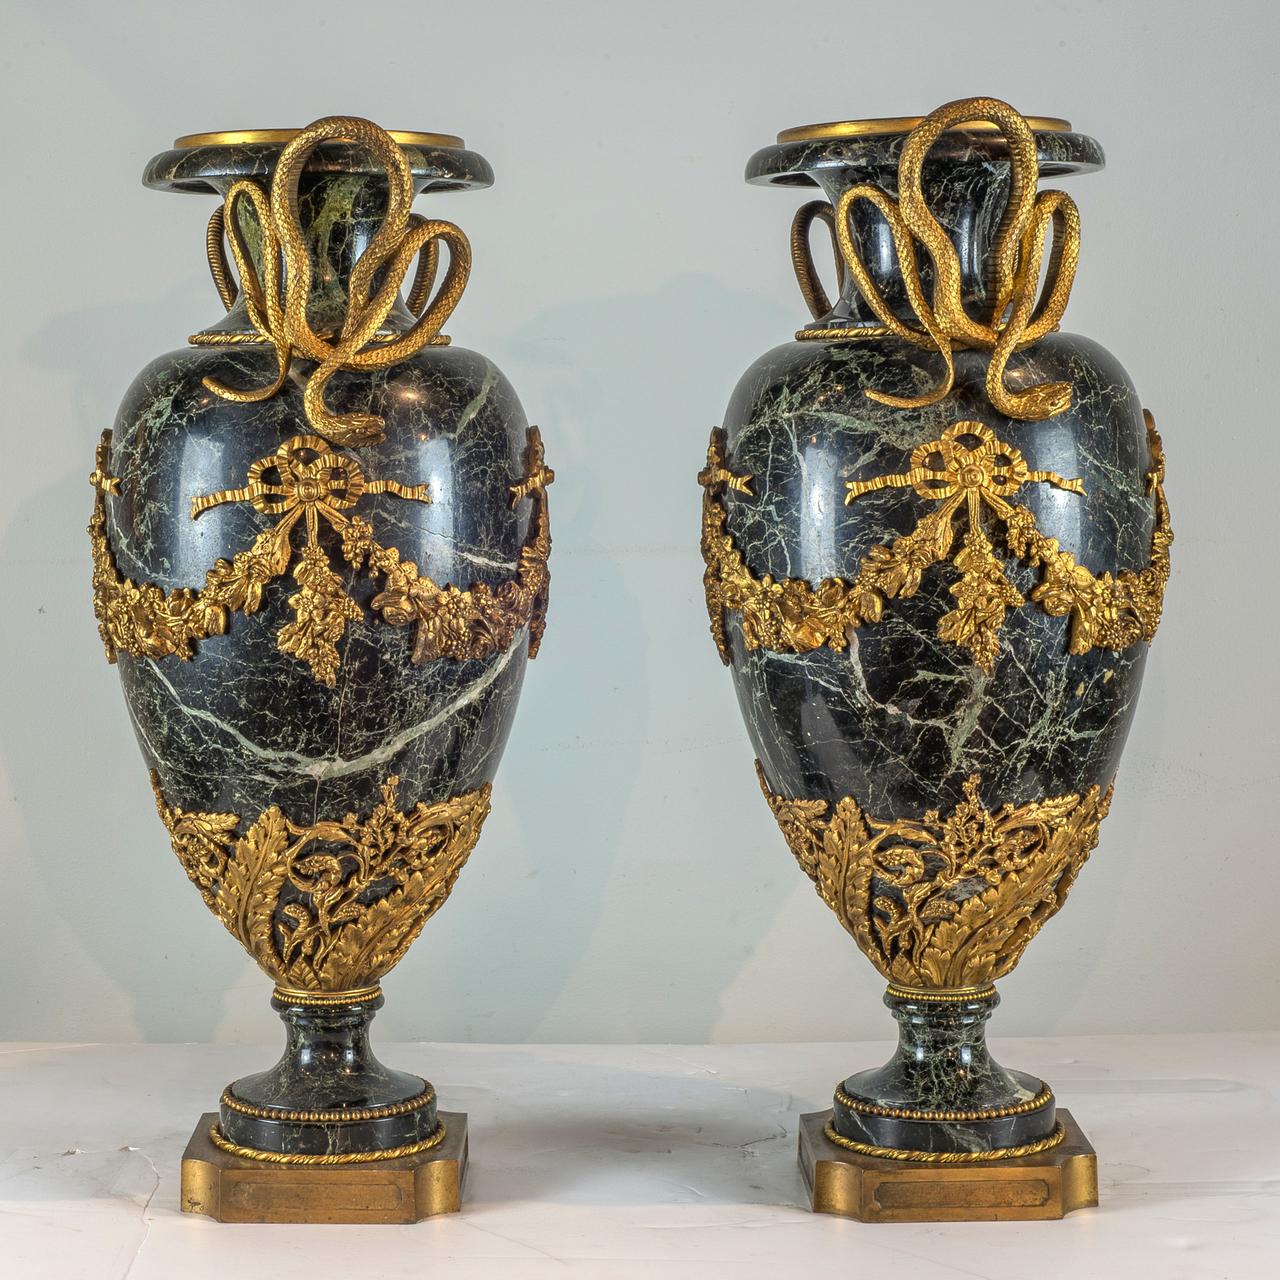 The grand and superb Ormolu-Mounted Verde Antico Marble Urns modeled with entwined serpent handles. The body applied with flowers swags jointed by a bow and the fluted foot is covered by an elaborate decoration.

Origin: French
Date: 19th